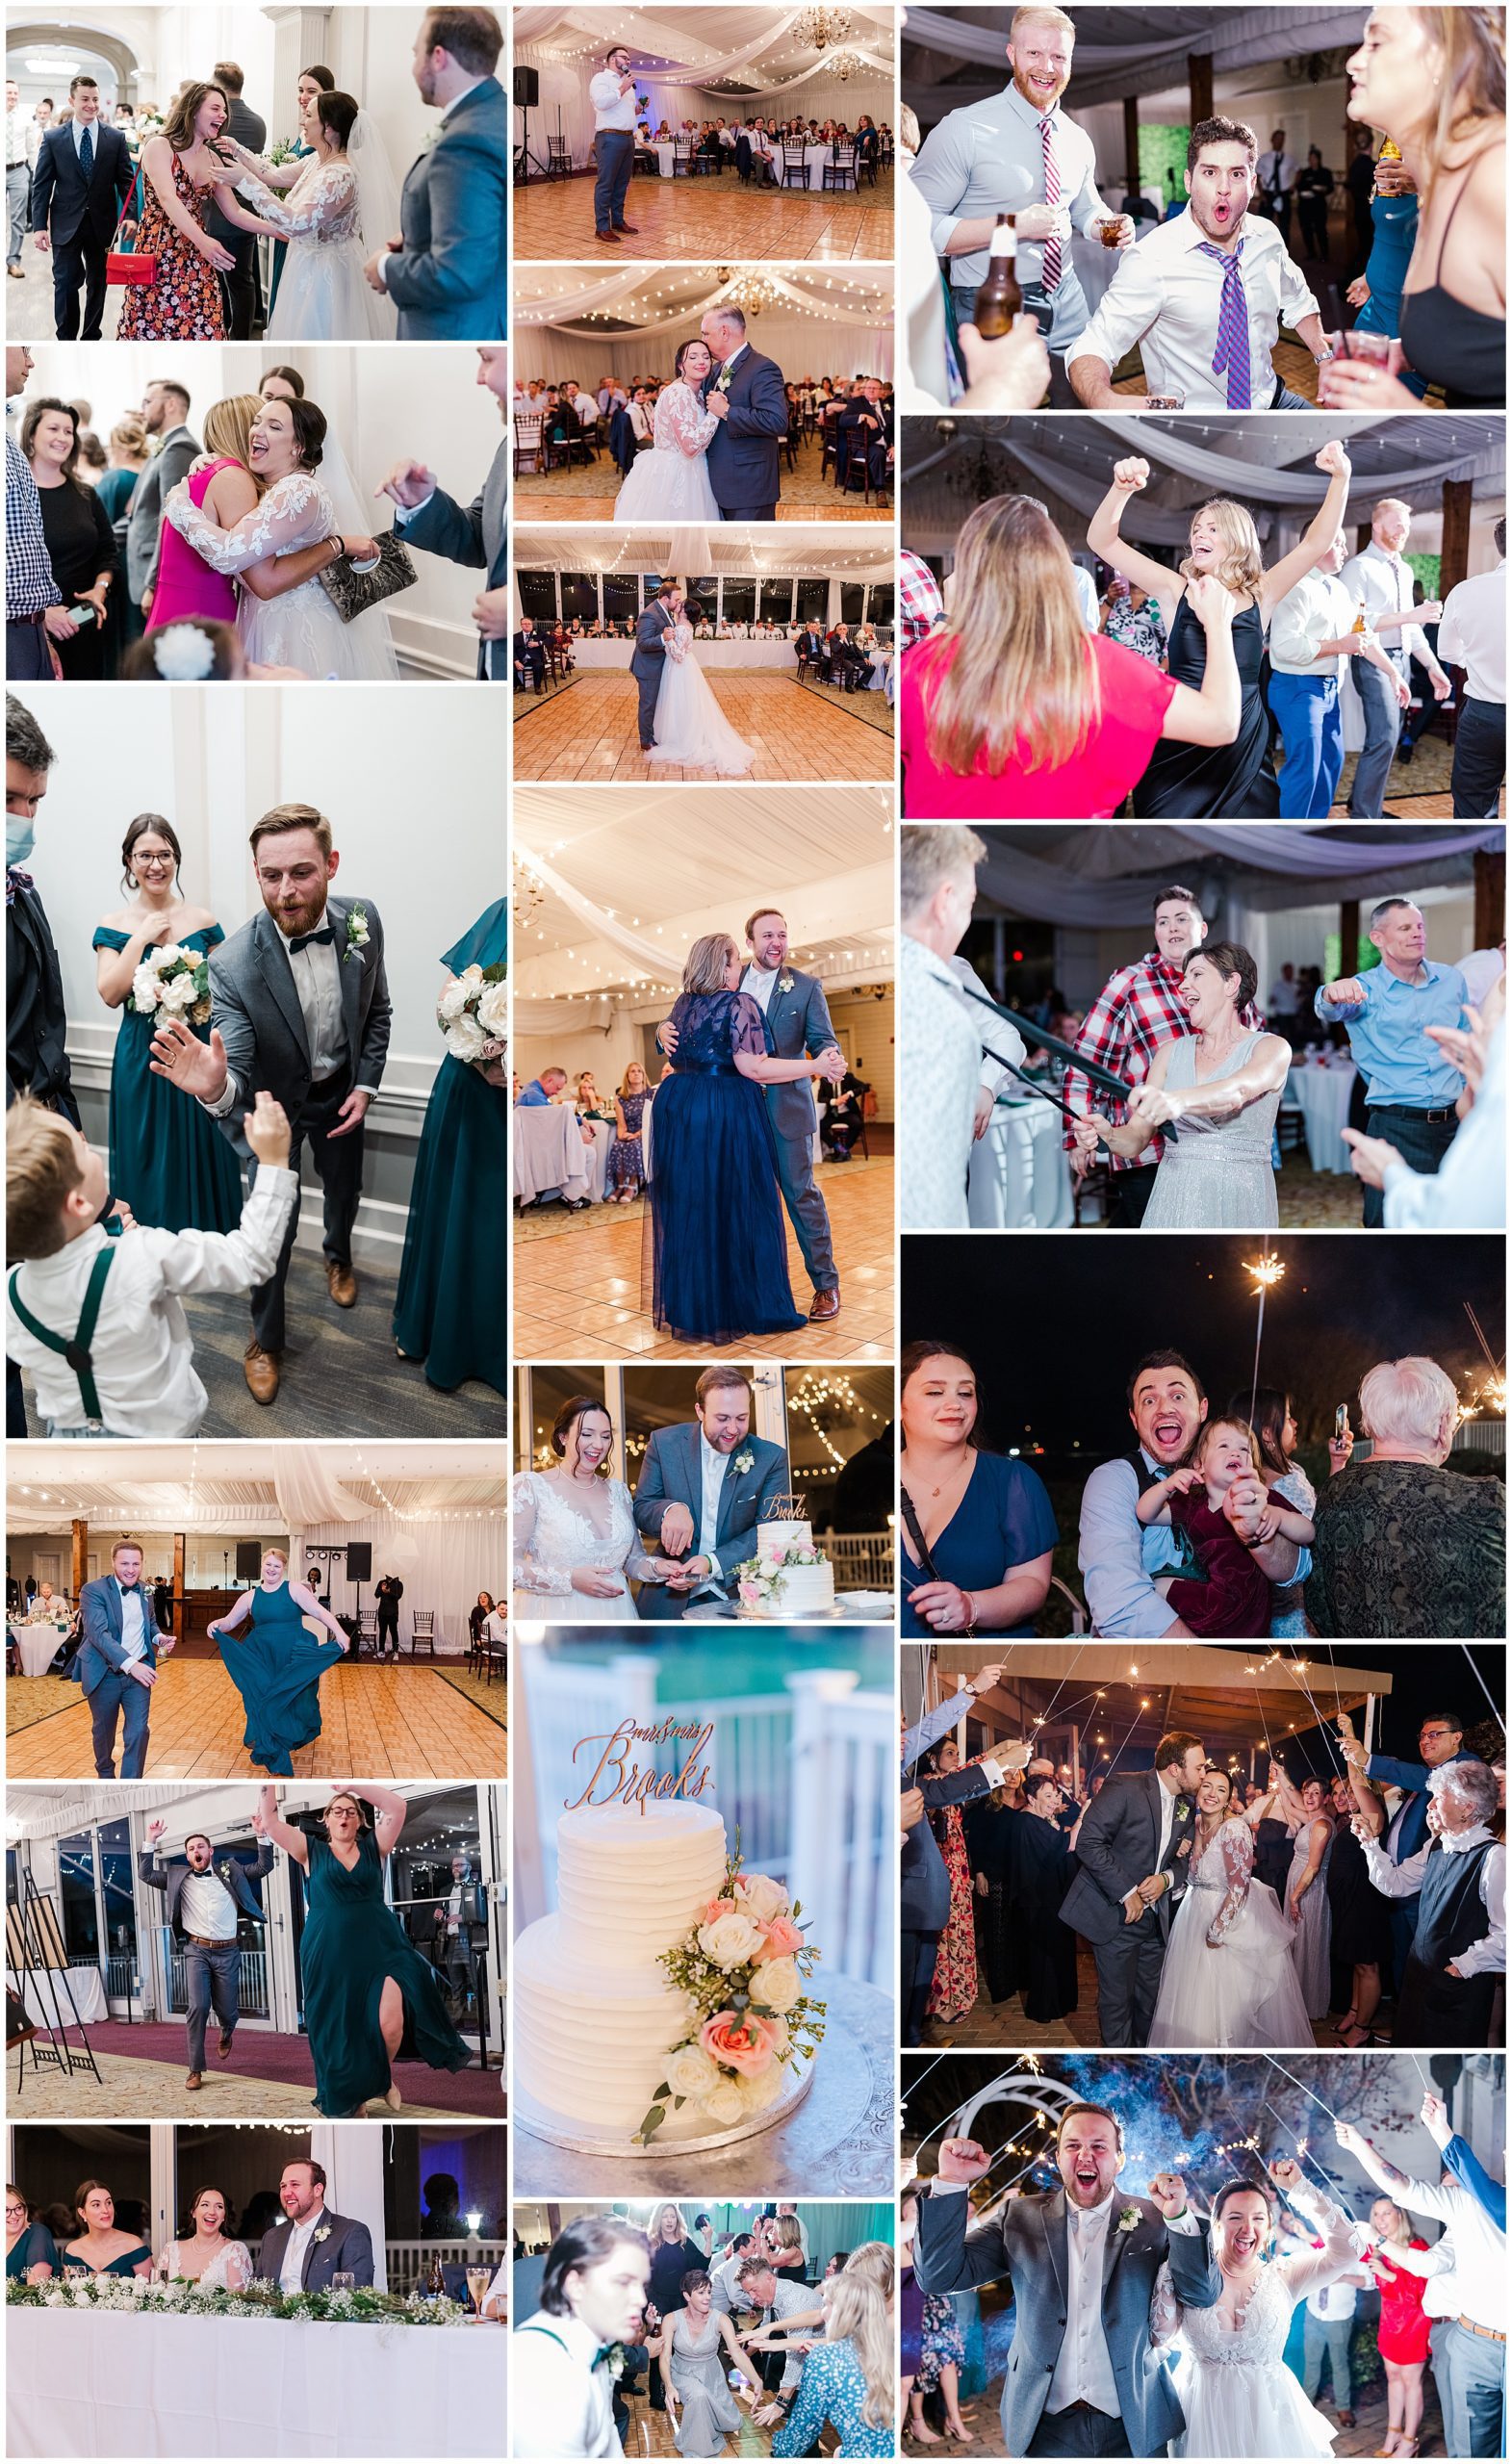 Collage of reception images with dancing and cake cutting before Leah and Michael's sparker send-off